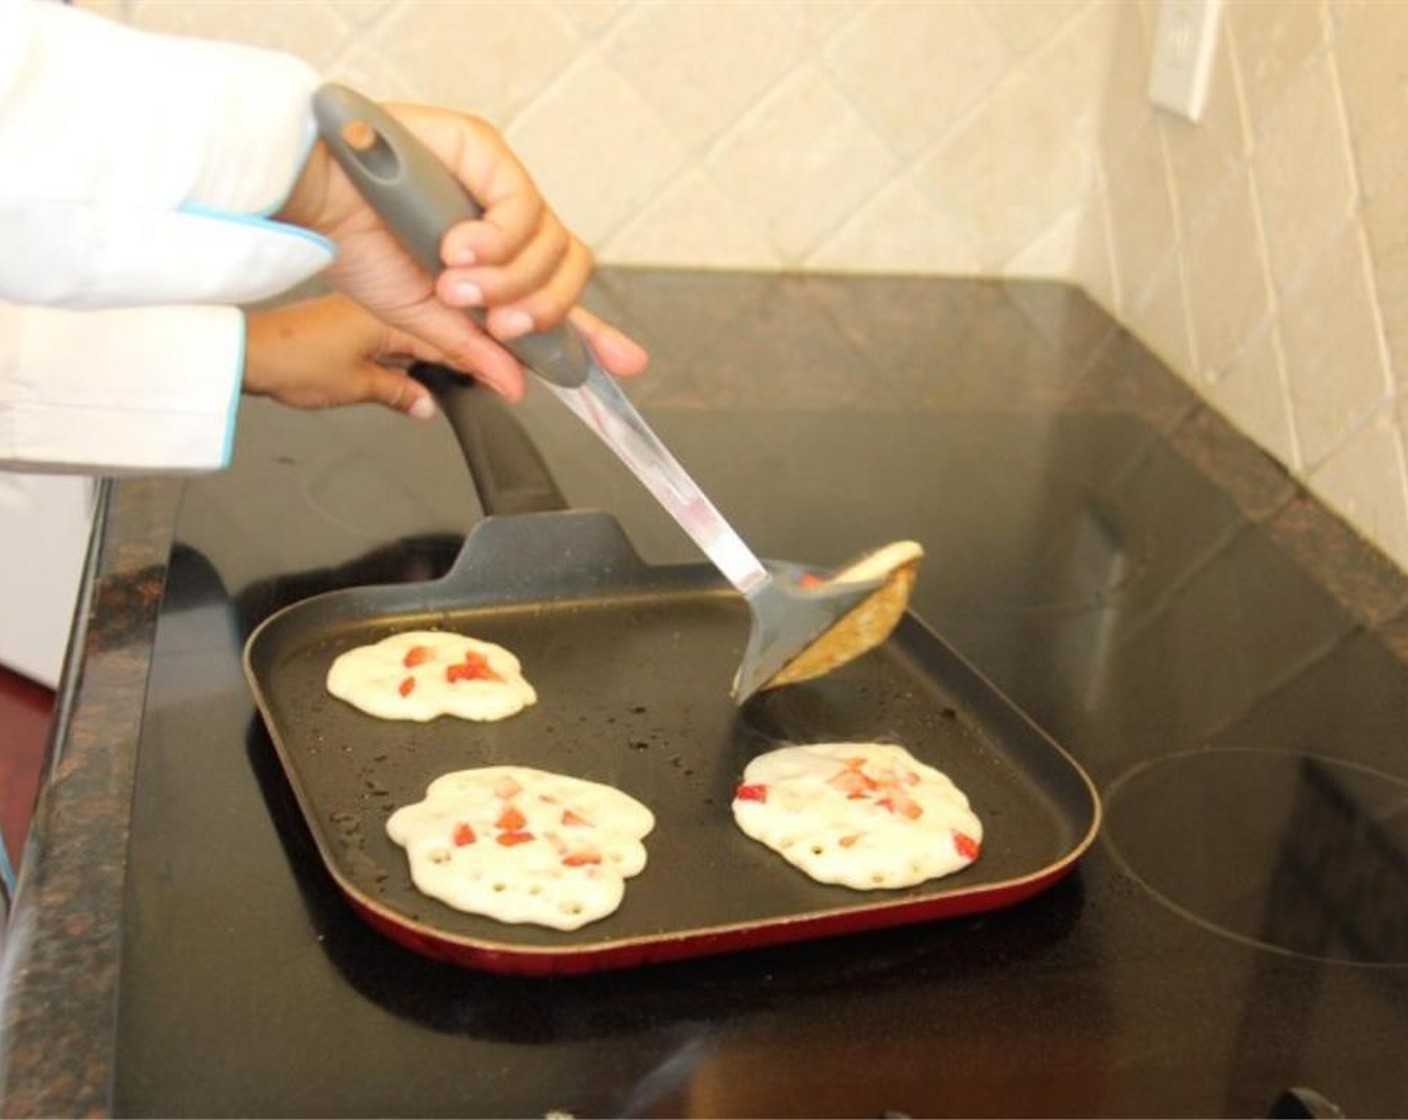 step 6 Make sure to wait until the pancake's edges are dry and the top of the pancake has bubbles rising up before you flip the pancakes.